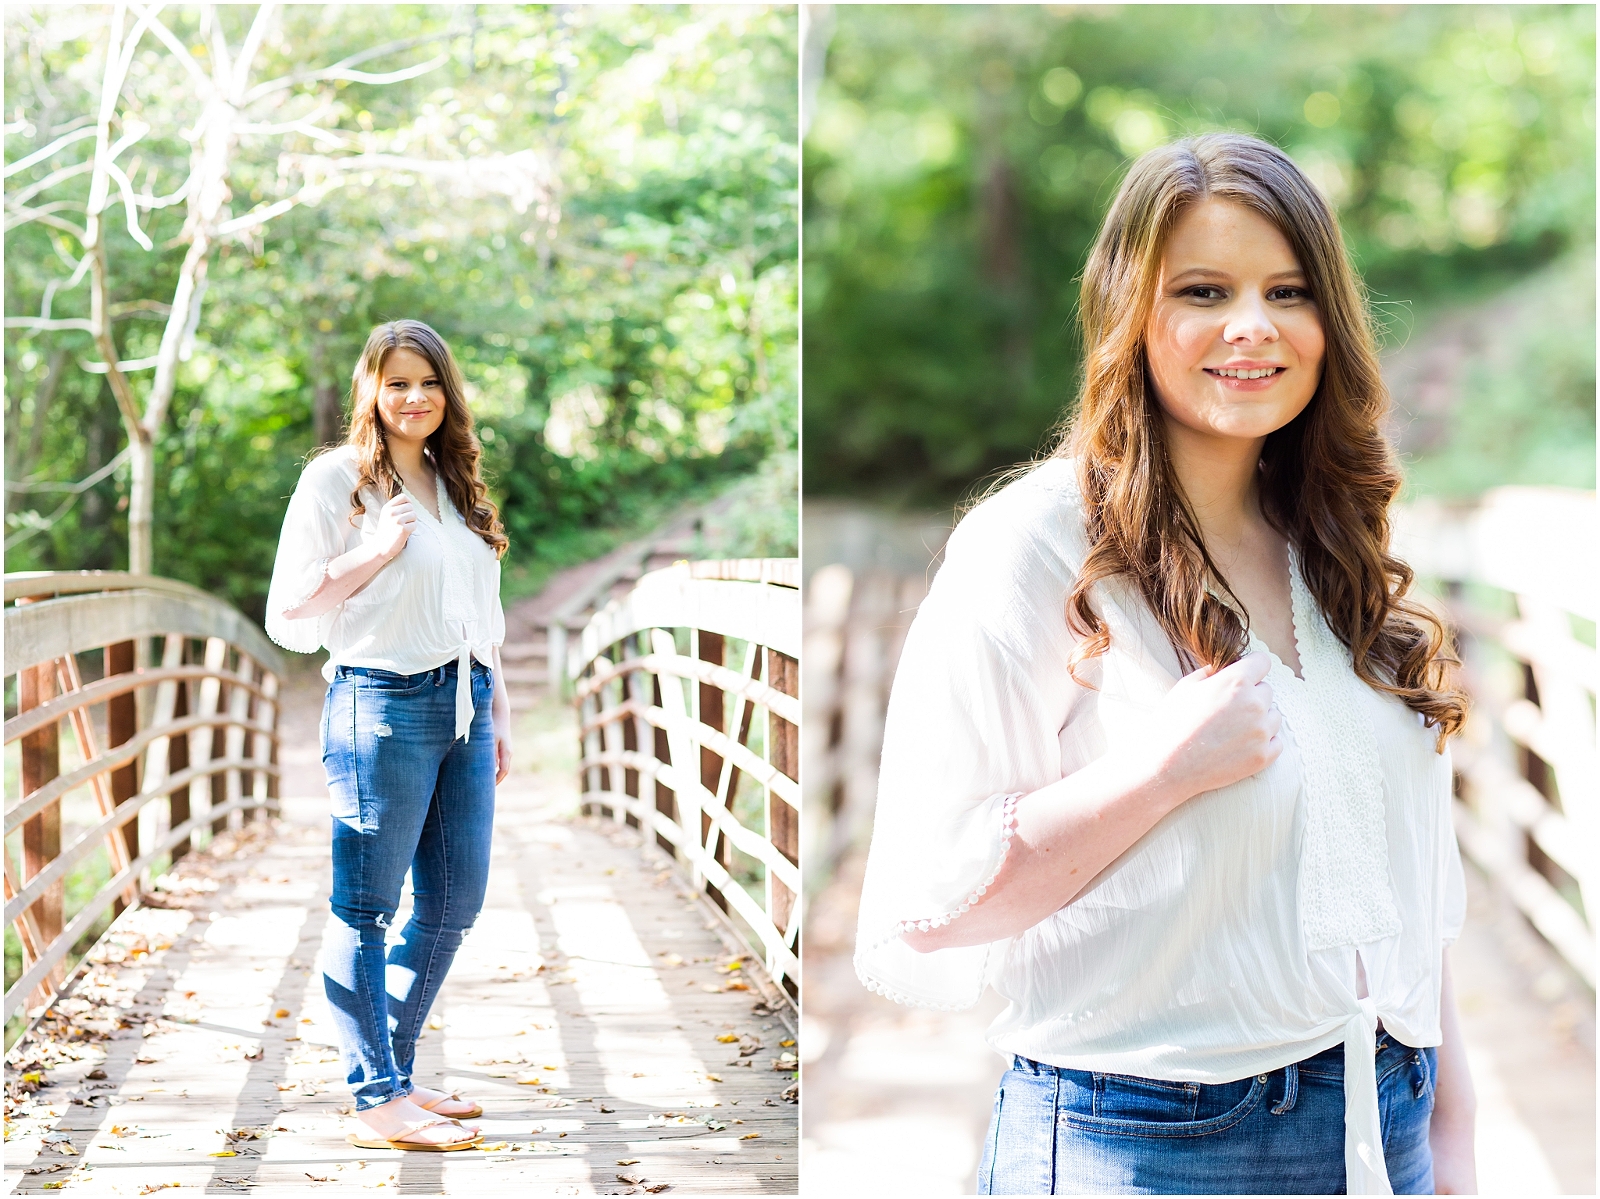 Look at these adorable senior! She booked a mini senior session with me and it was a blast! Outdoors at Elanor C. Lawrence Park in Fairfax, VA. Beautiful end of summer weather. There is an adorable footbridge, btw. Click to view full session! Photographed by Bethanie Vetter Photography LLC.#ElanorCLawrence #ElanorCLawrencePark #ECLawrencePark #footbridge #fairfaxva #senior #seniorsession #highschoolsenior #gradphotos #seniorphotos